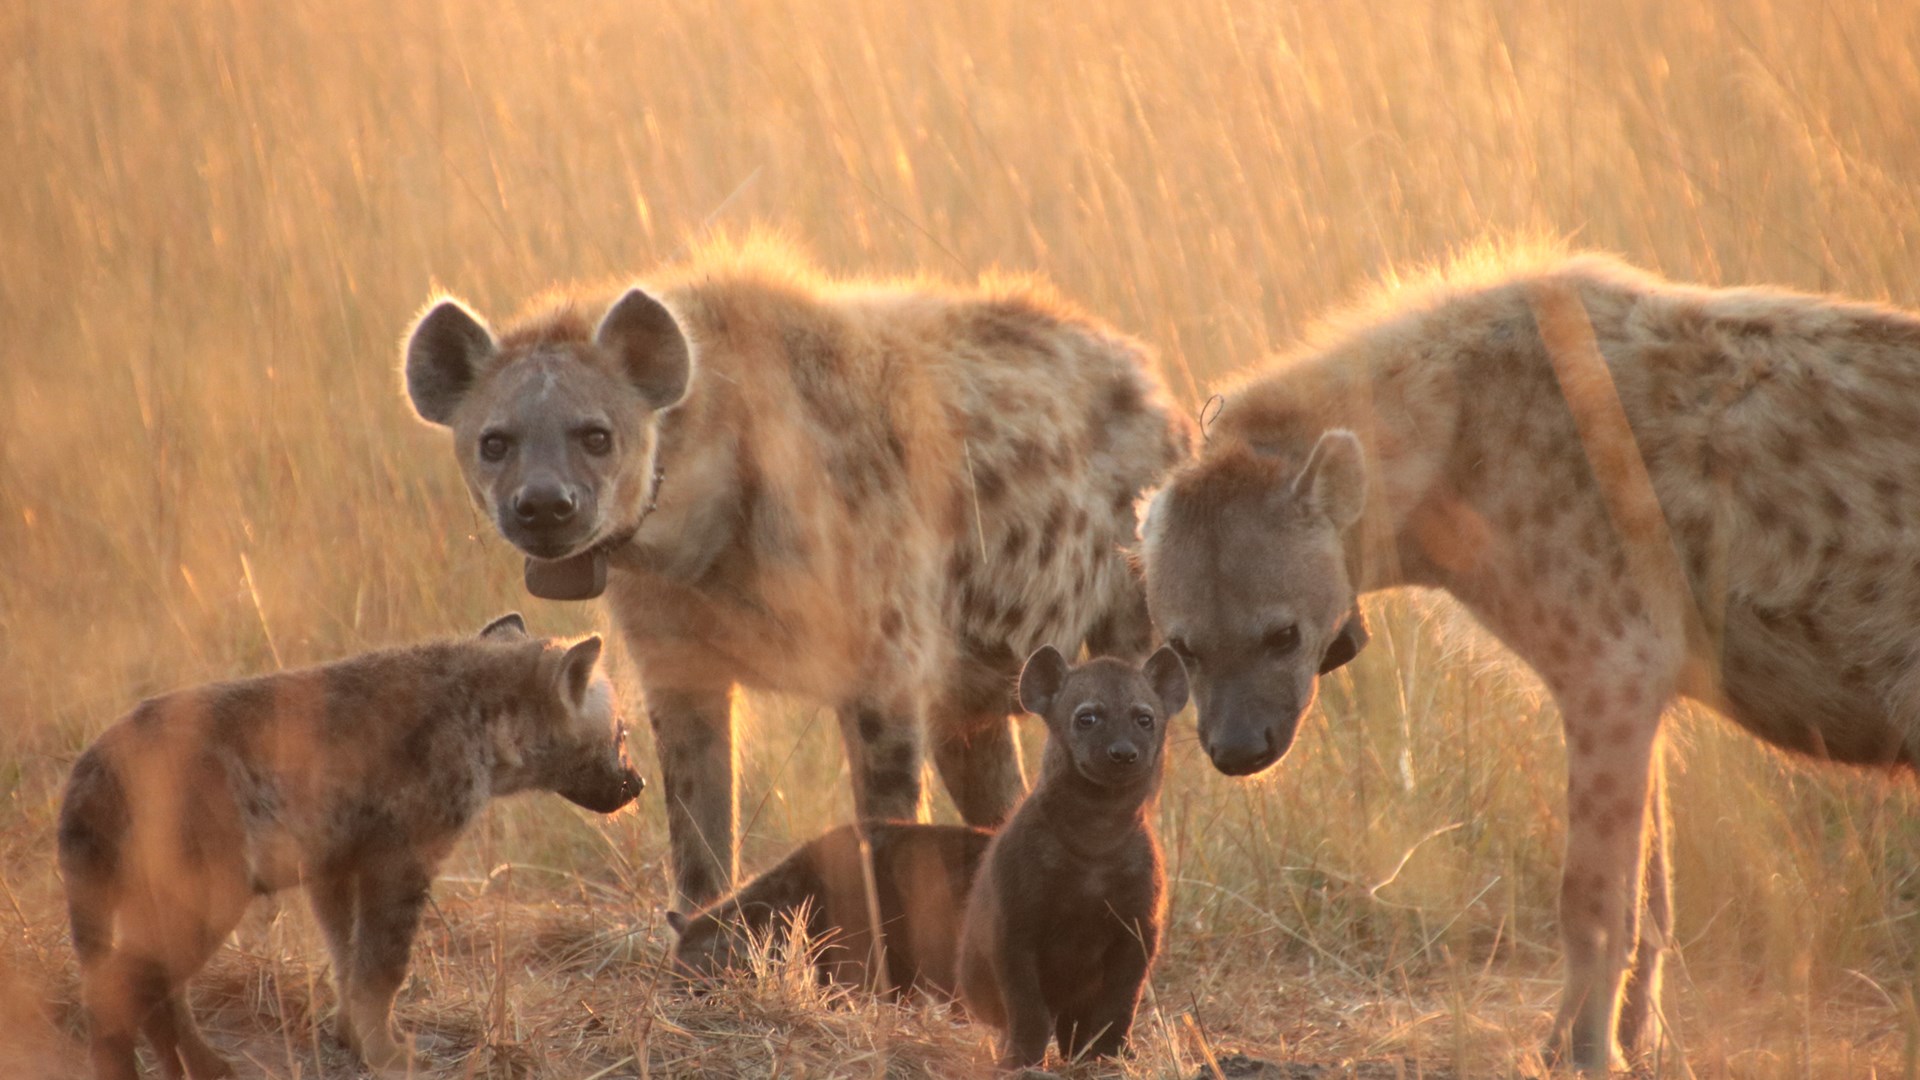 A group of hyenas photographed in golden light.